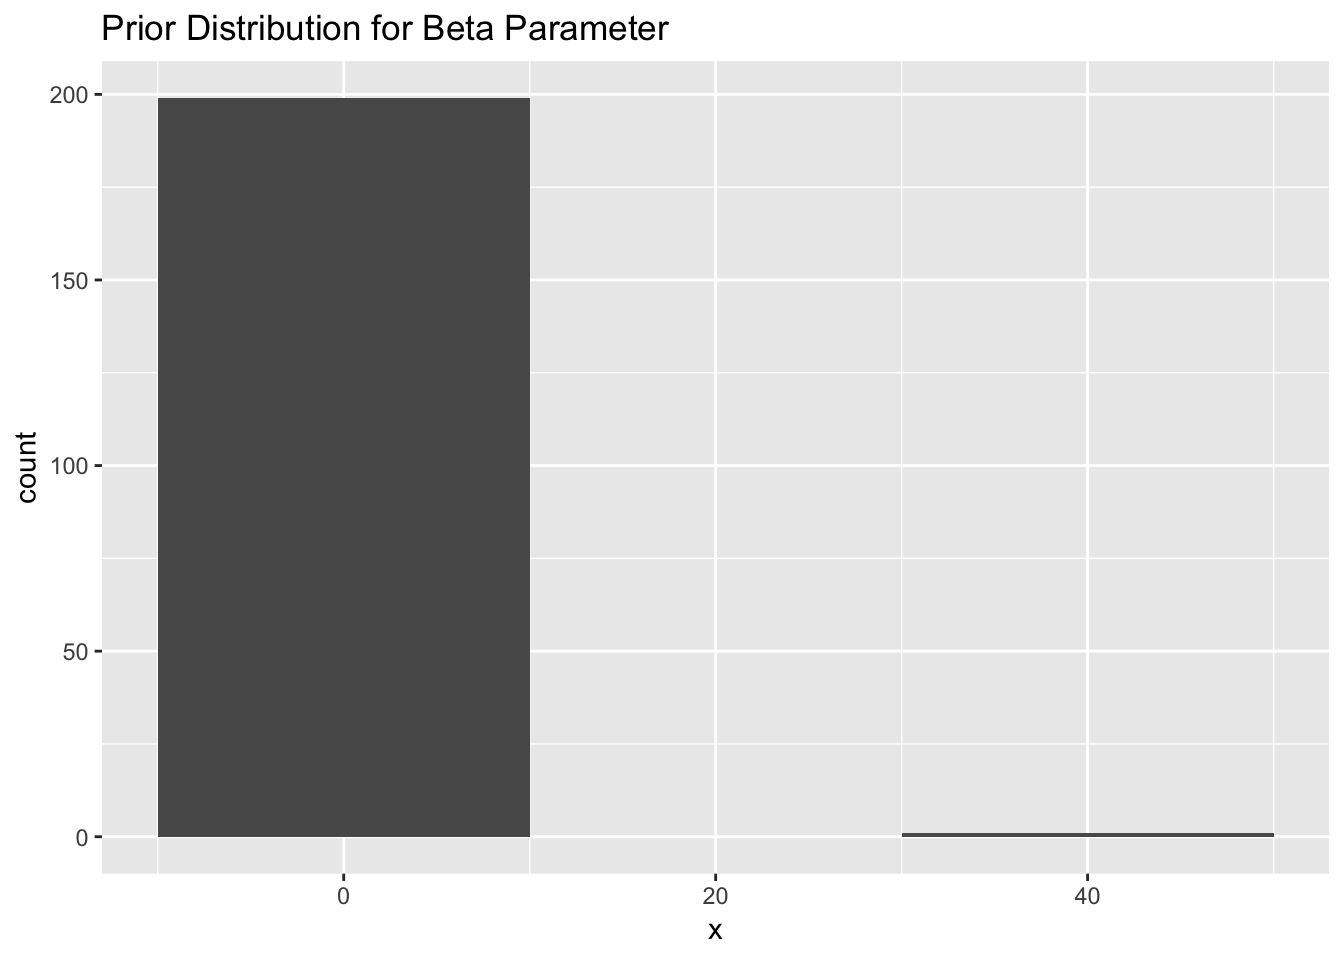 A histogram representing a prior distribution (normal) for the beta parameter with a mean of -4 and standard error of 2.